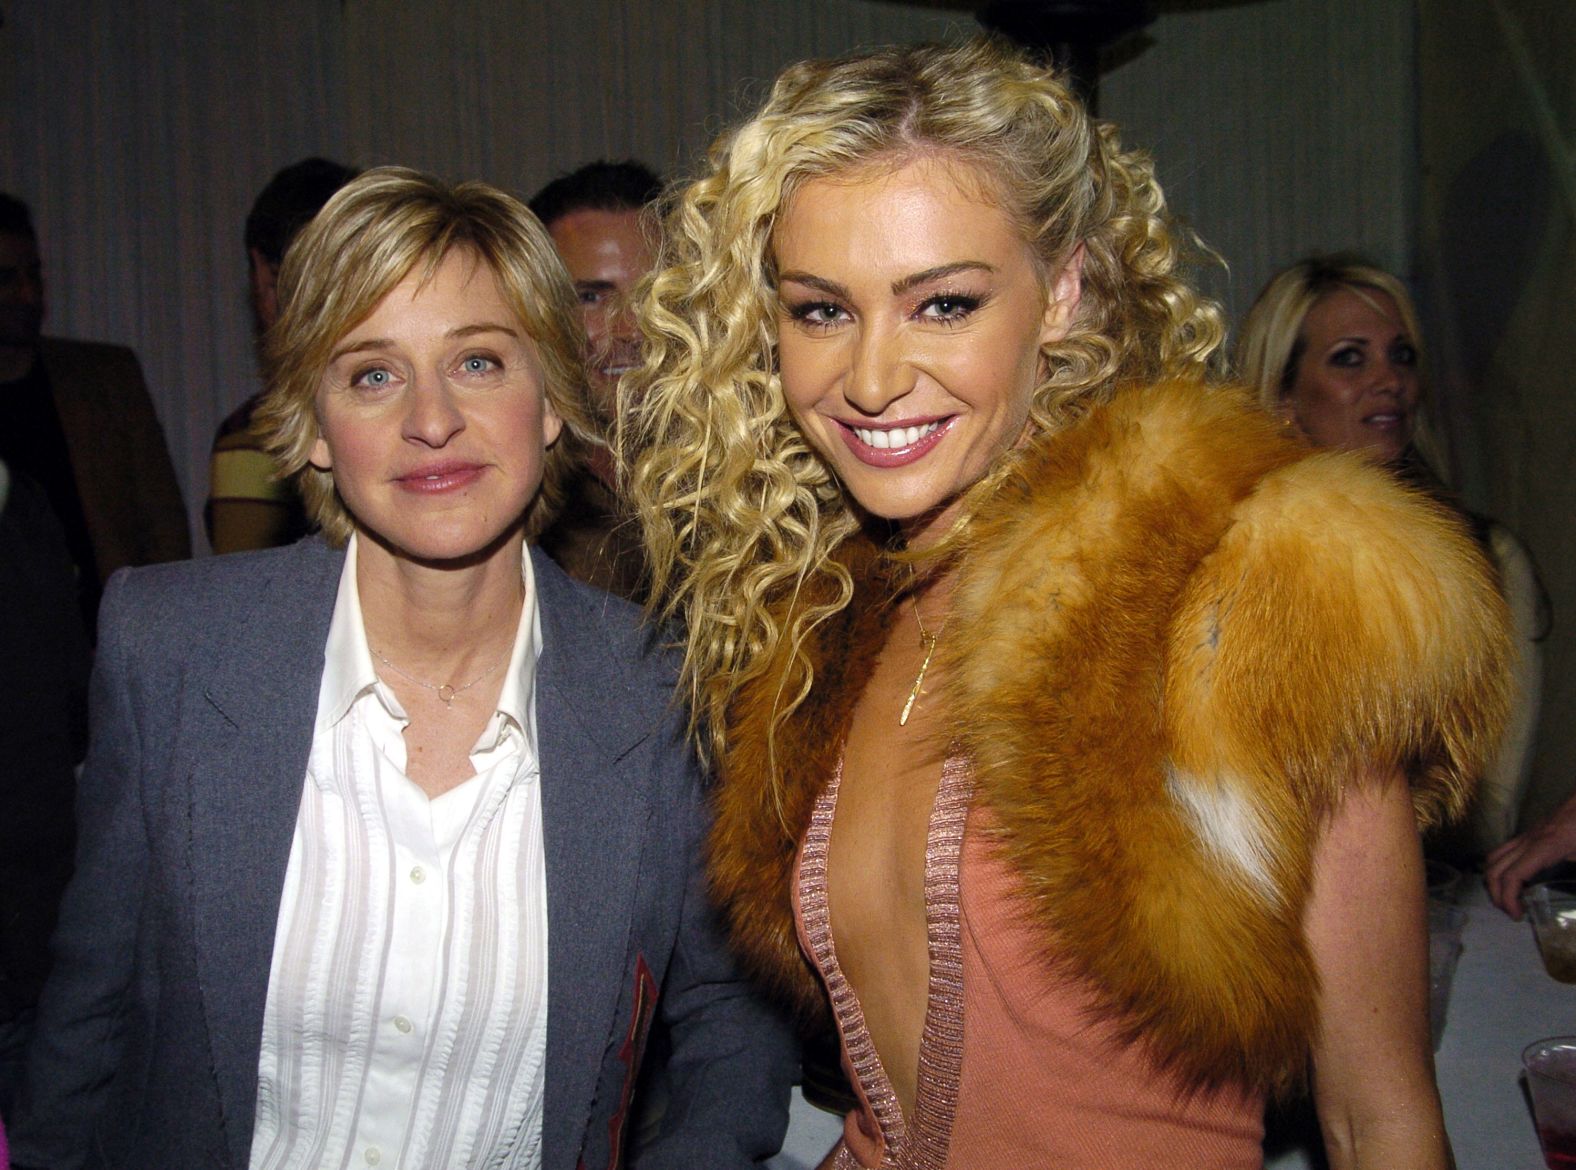 DeGeneres and actress Portia de Rossi started dating in 2004. They were married in 2008.